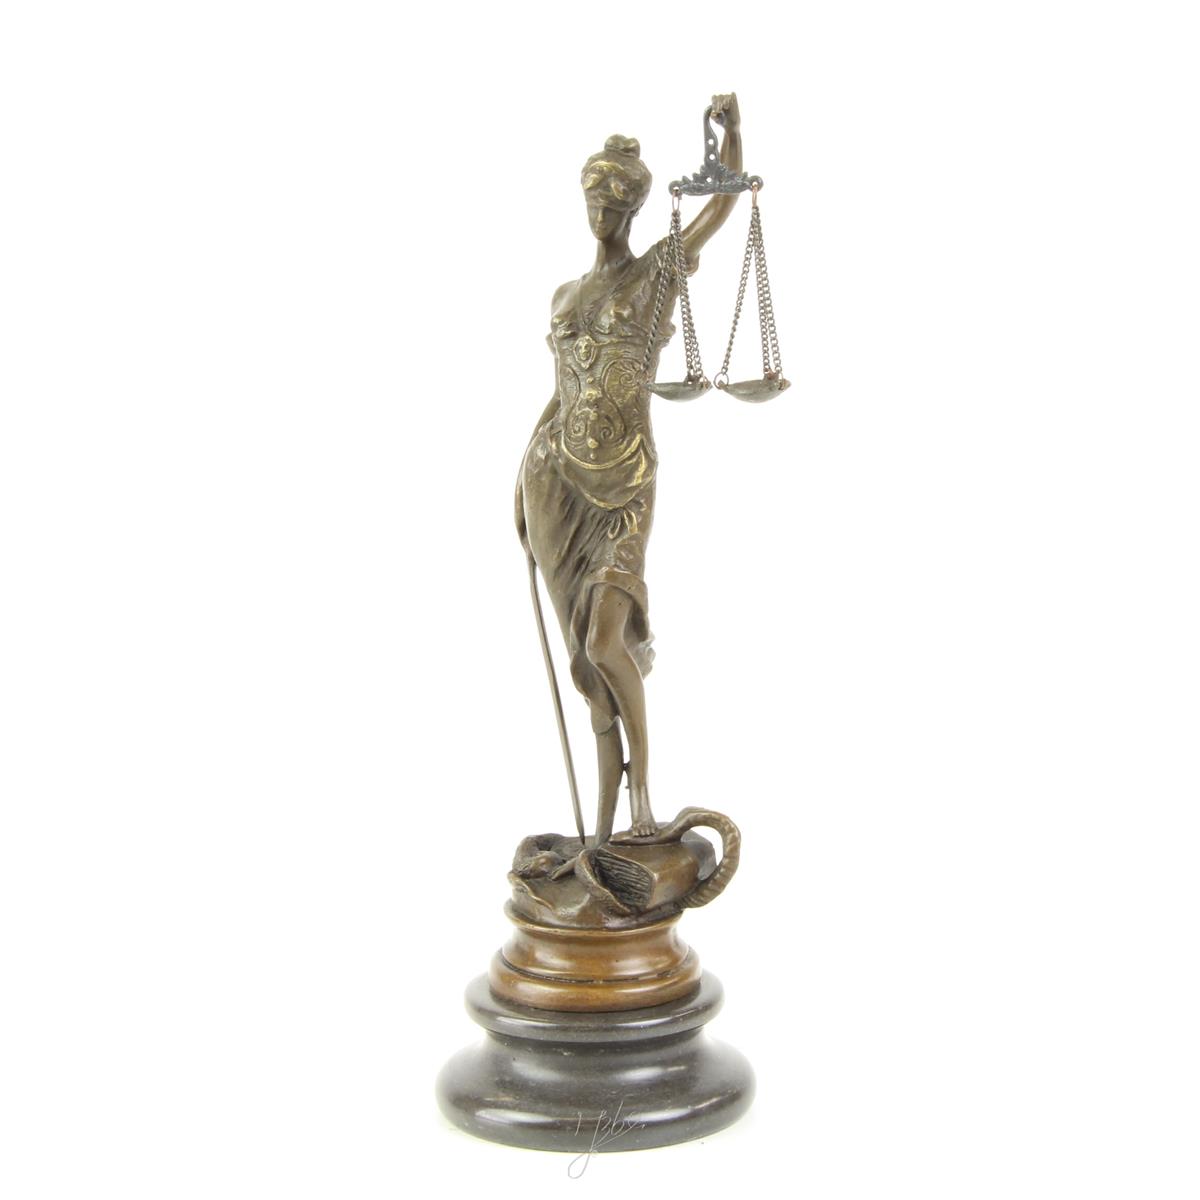 A BRONZE SCULPTURE OF THE LADY JUSTICE